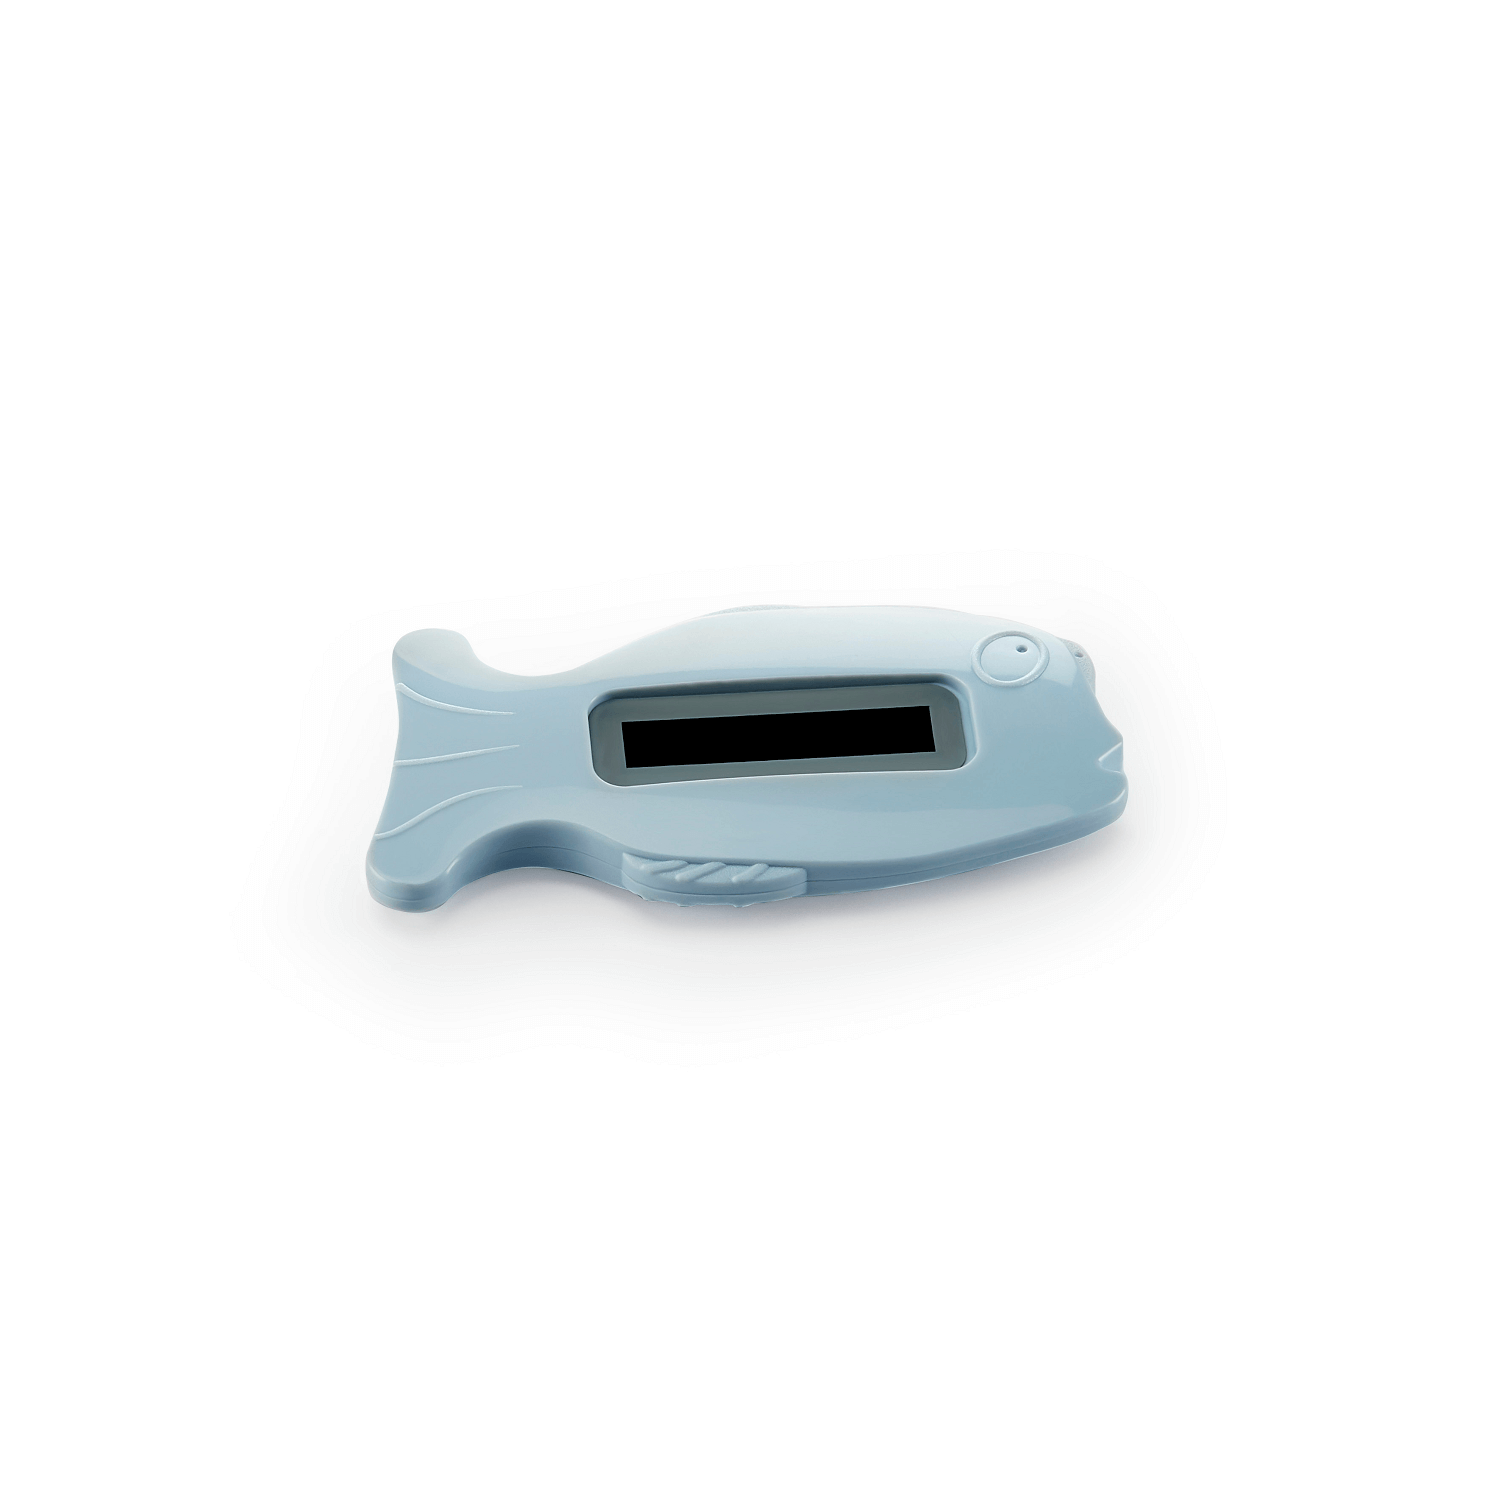 Thermobaby - Thermometre de bain BLEU Thermobaby